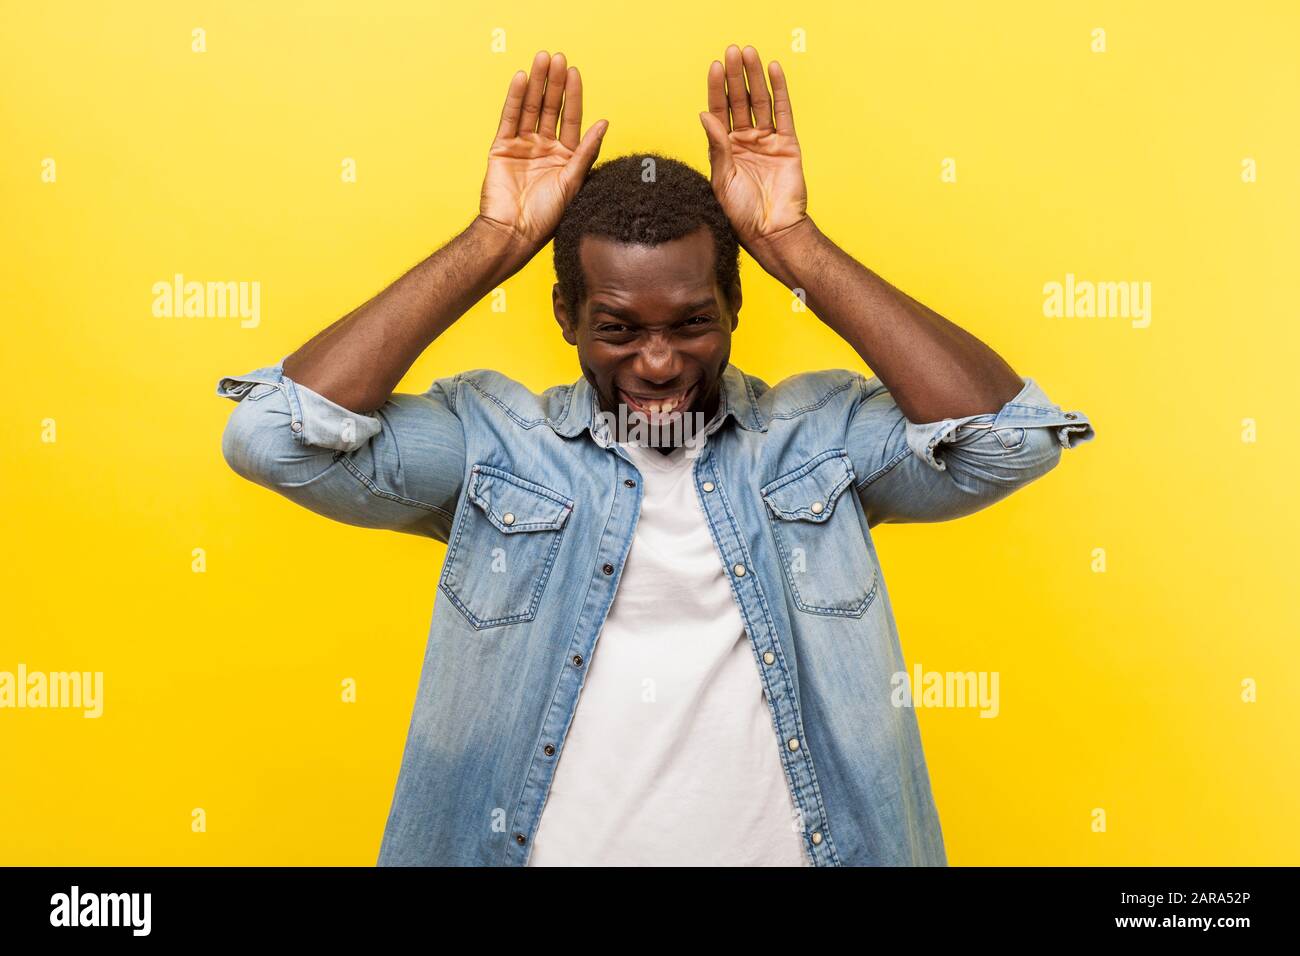 Portrait of extremely joyous man in denim casual shirt with rolled up sleeves showing bunny ears gesture, having fun with silly hilarious expression. Stock Photo